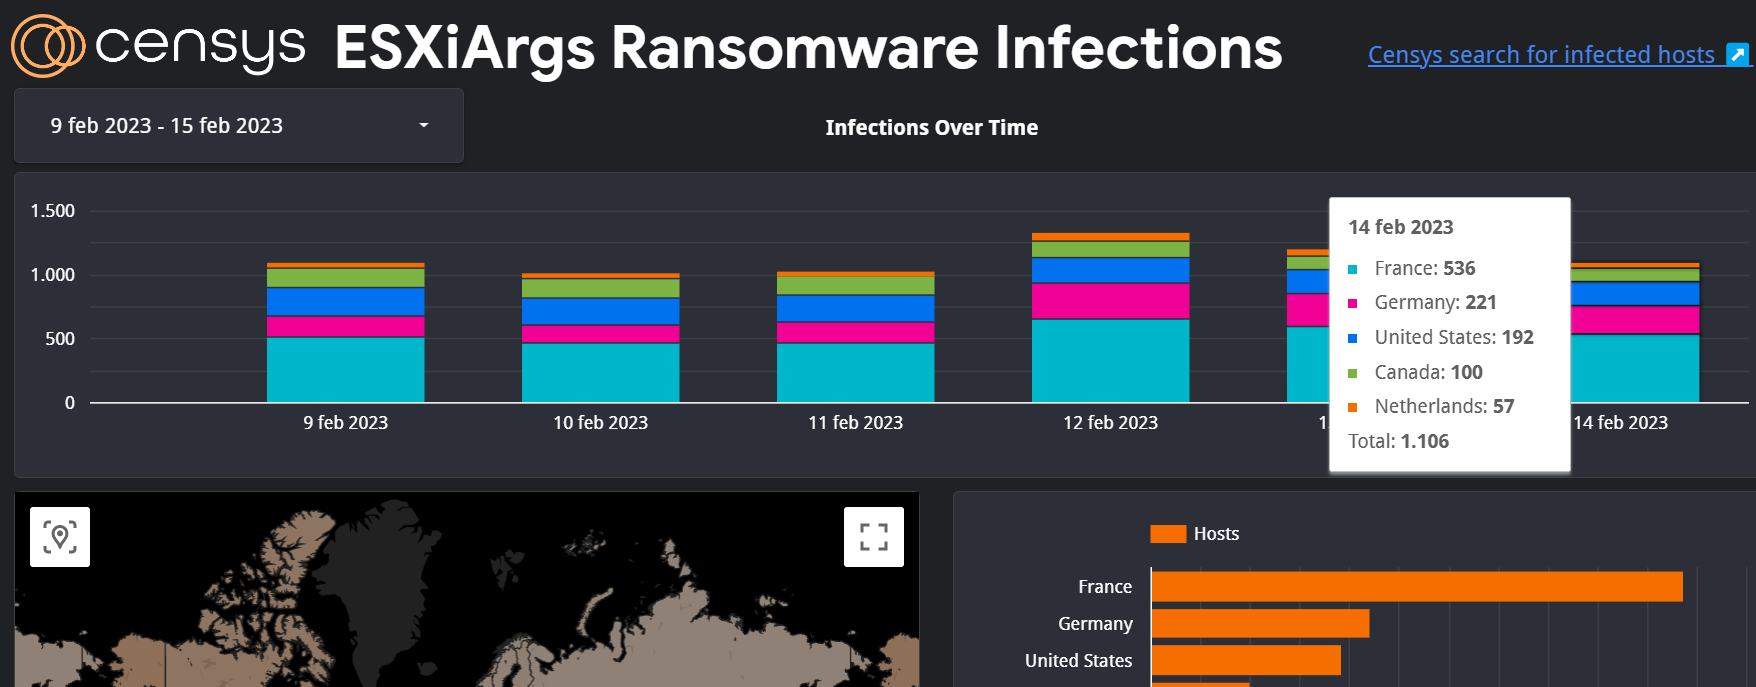 Over 500 ESXiArgs Ransomware infections in one day, but they dropped the day after